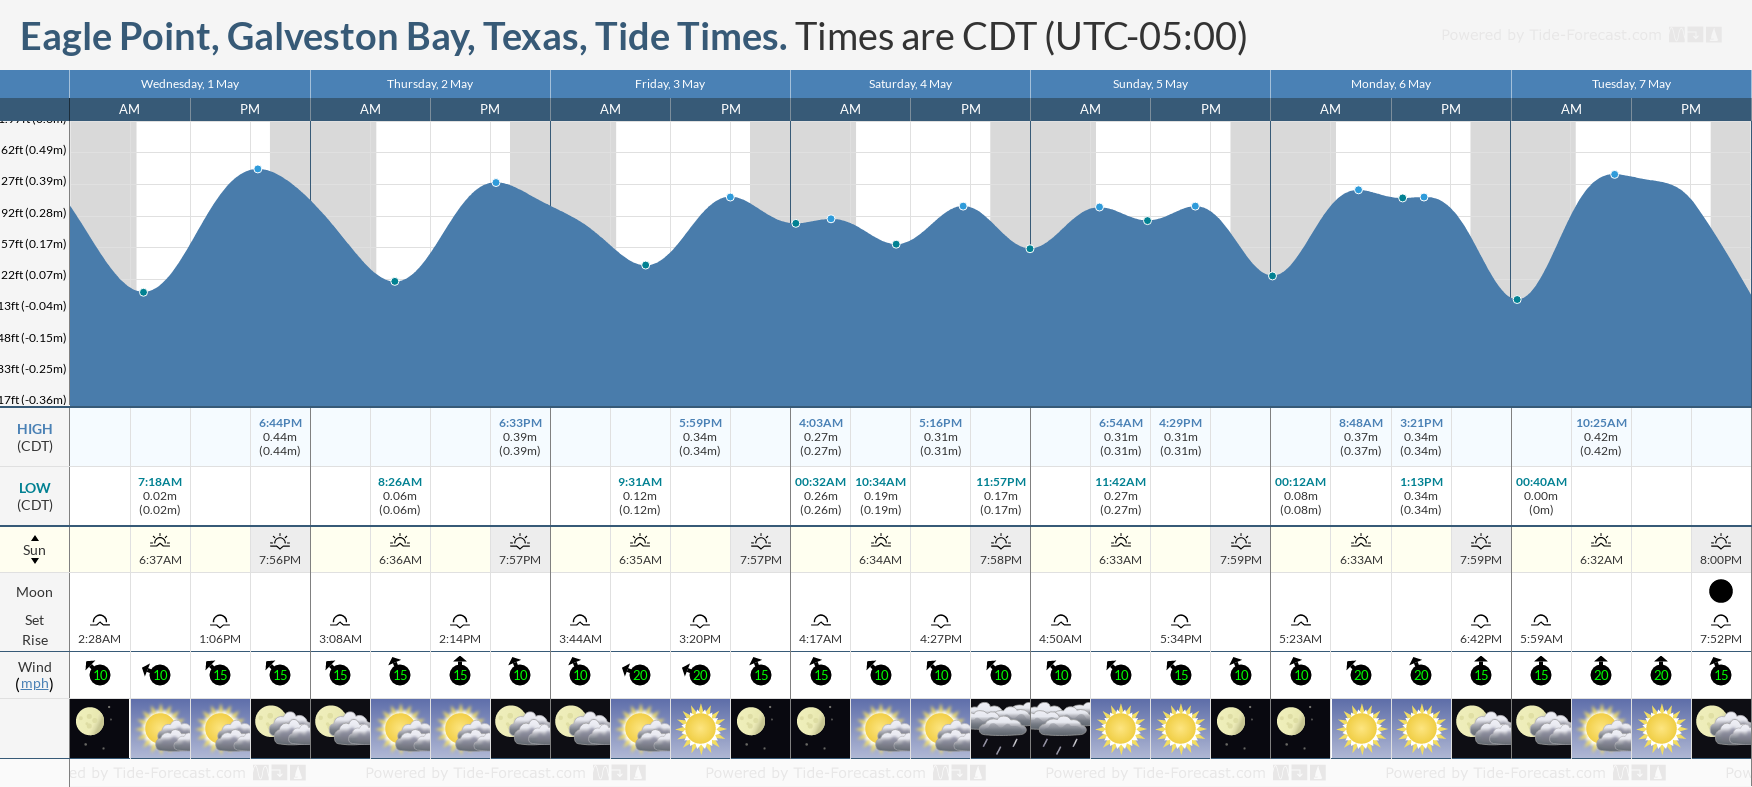 Eagle Point, Galveston Bay, Texas Tide Chart including high and low tide tide times for the next 7 days